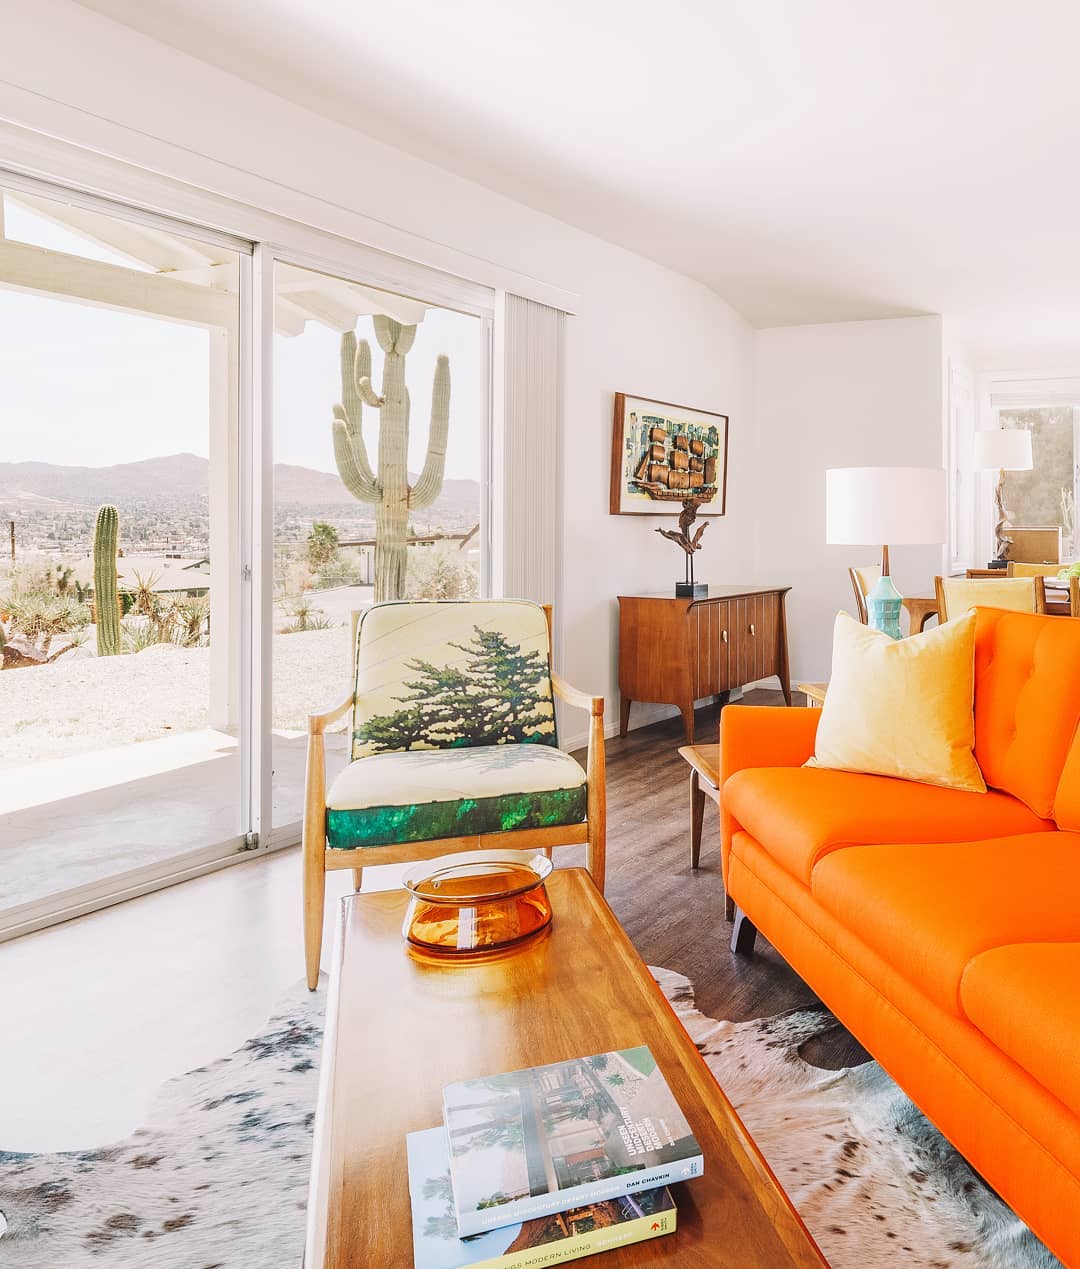 Modern Living Room with Orange Couch. Photo by Instagram user @jtreebnb